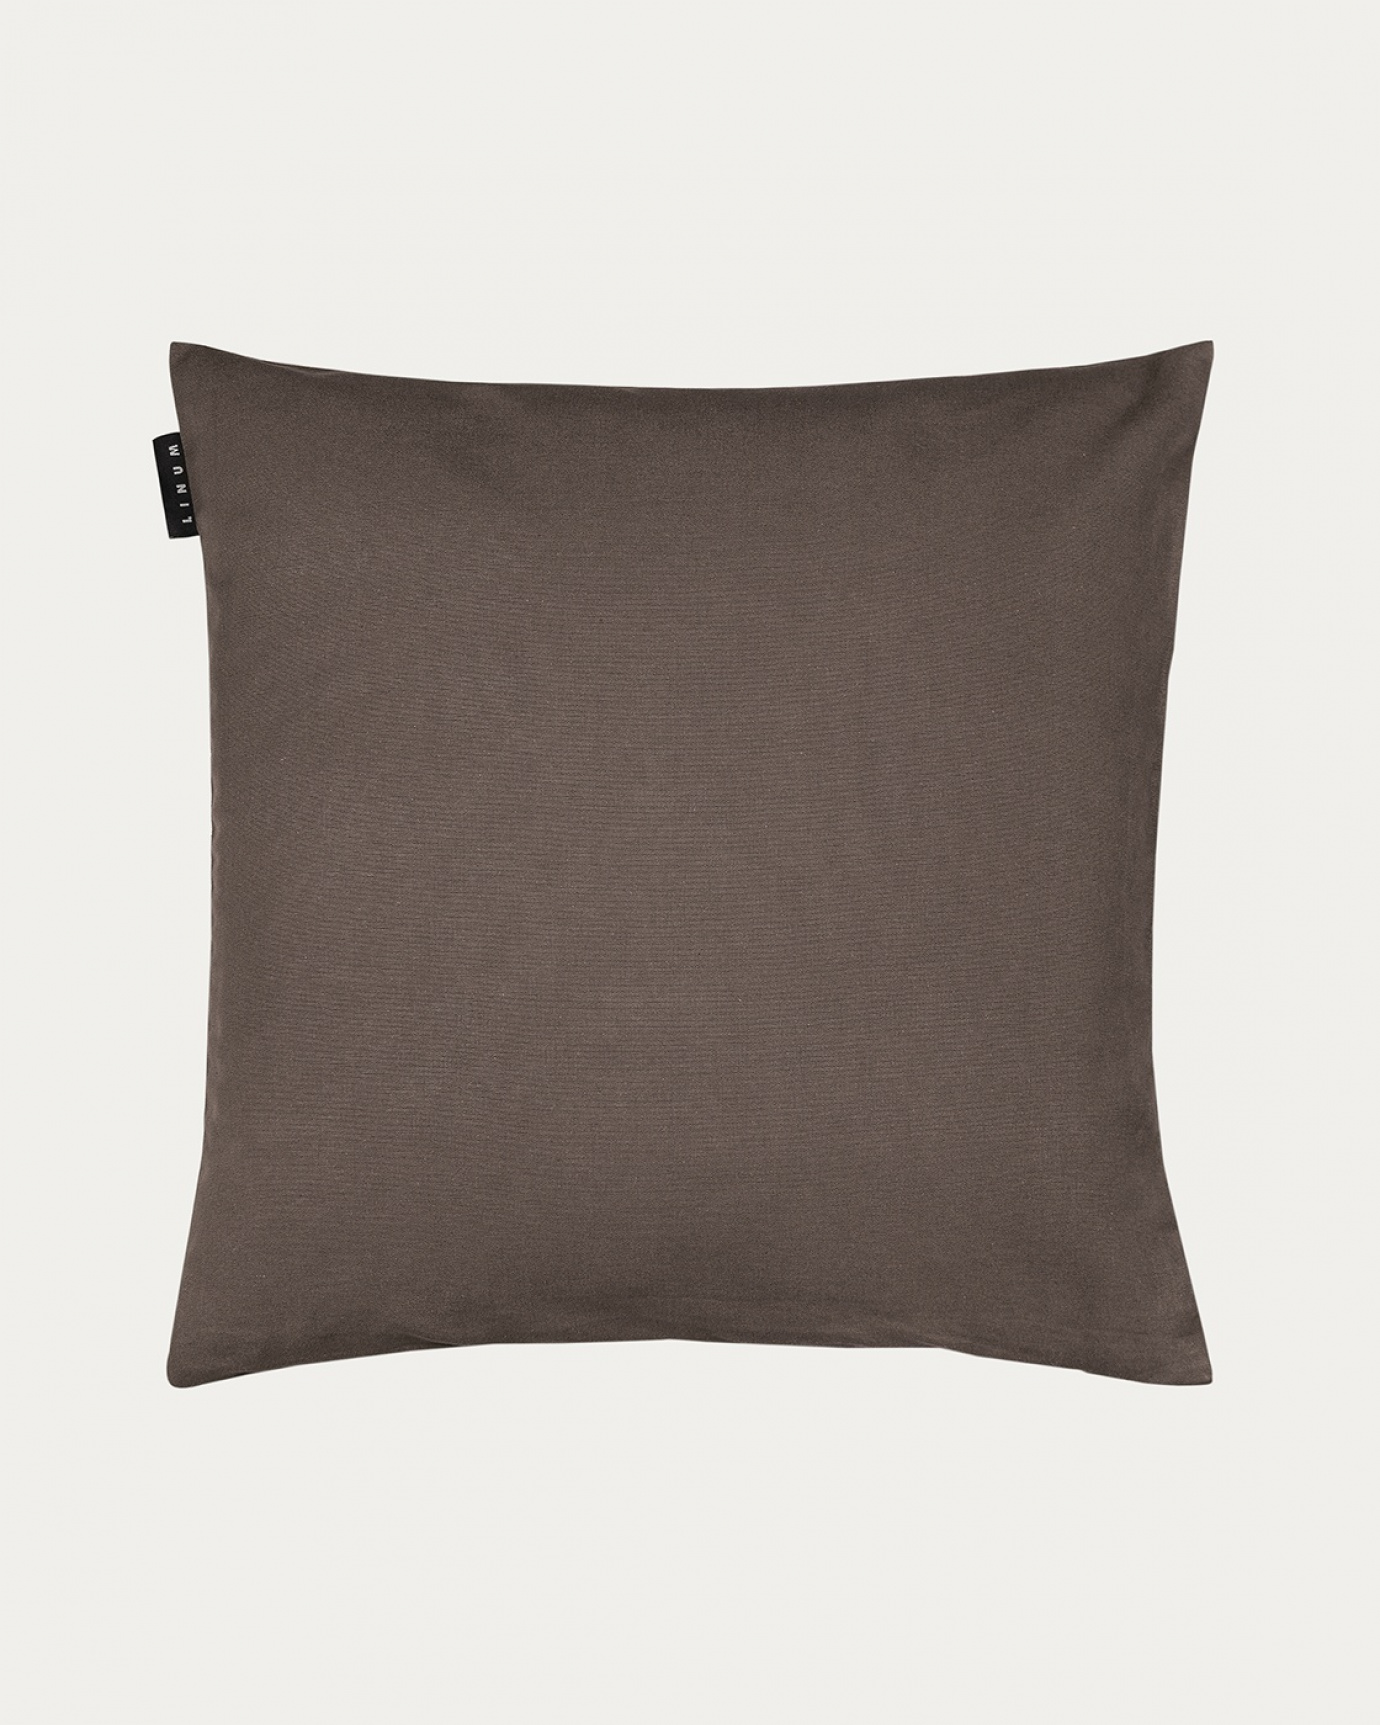 Product image bear brown ANNABELL cushion cover made of soft cotton from LINUM DESIGN. Size 50x50 cm.